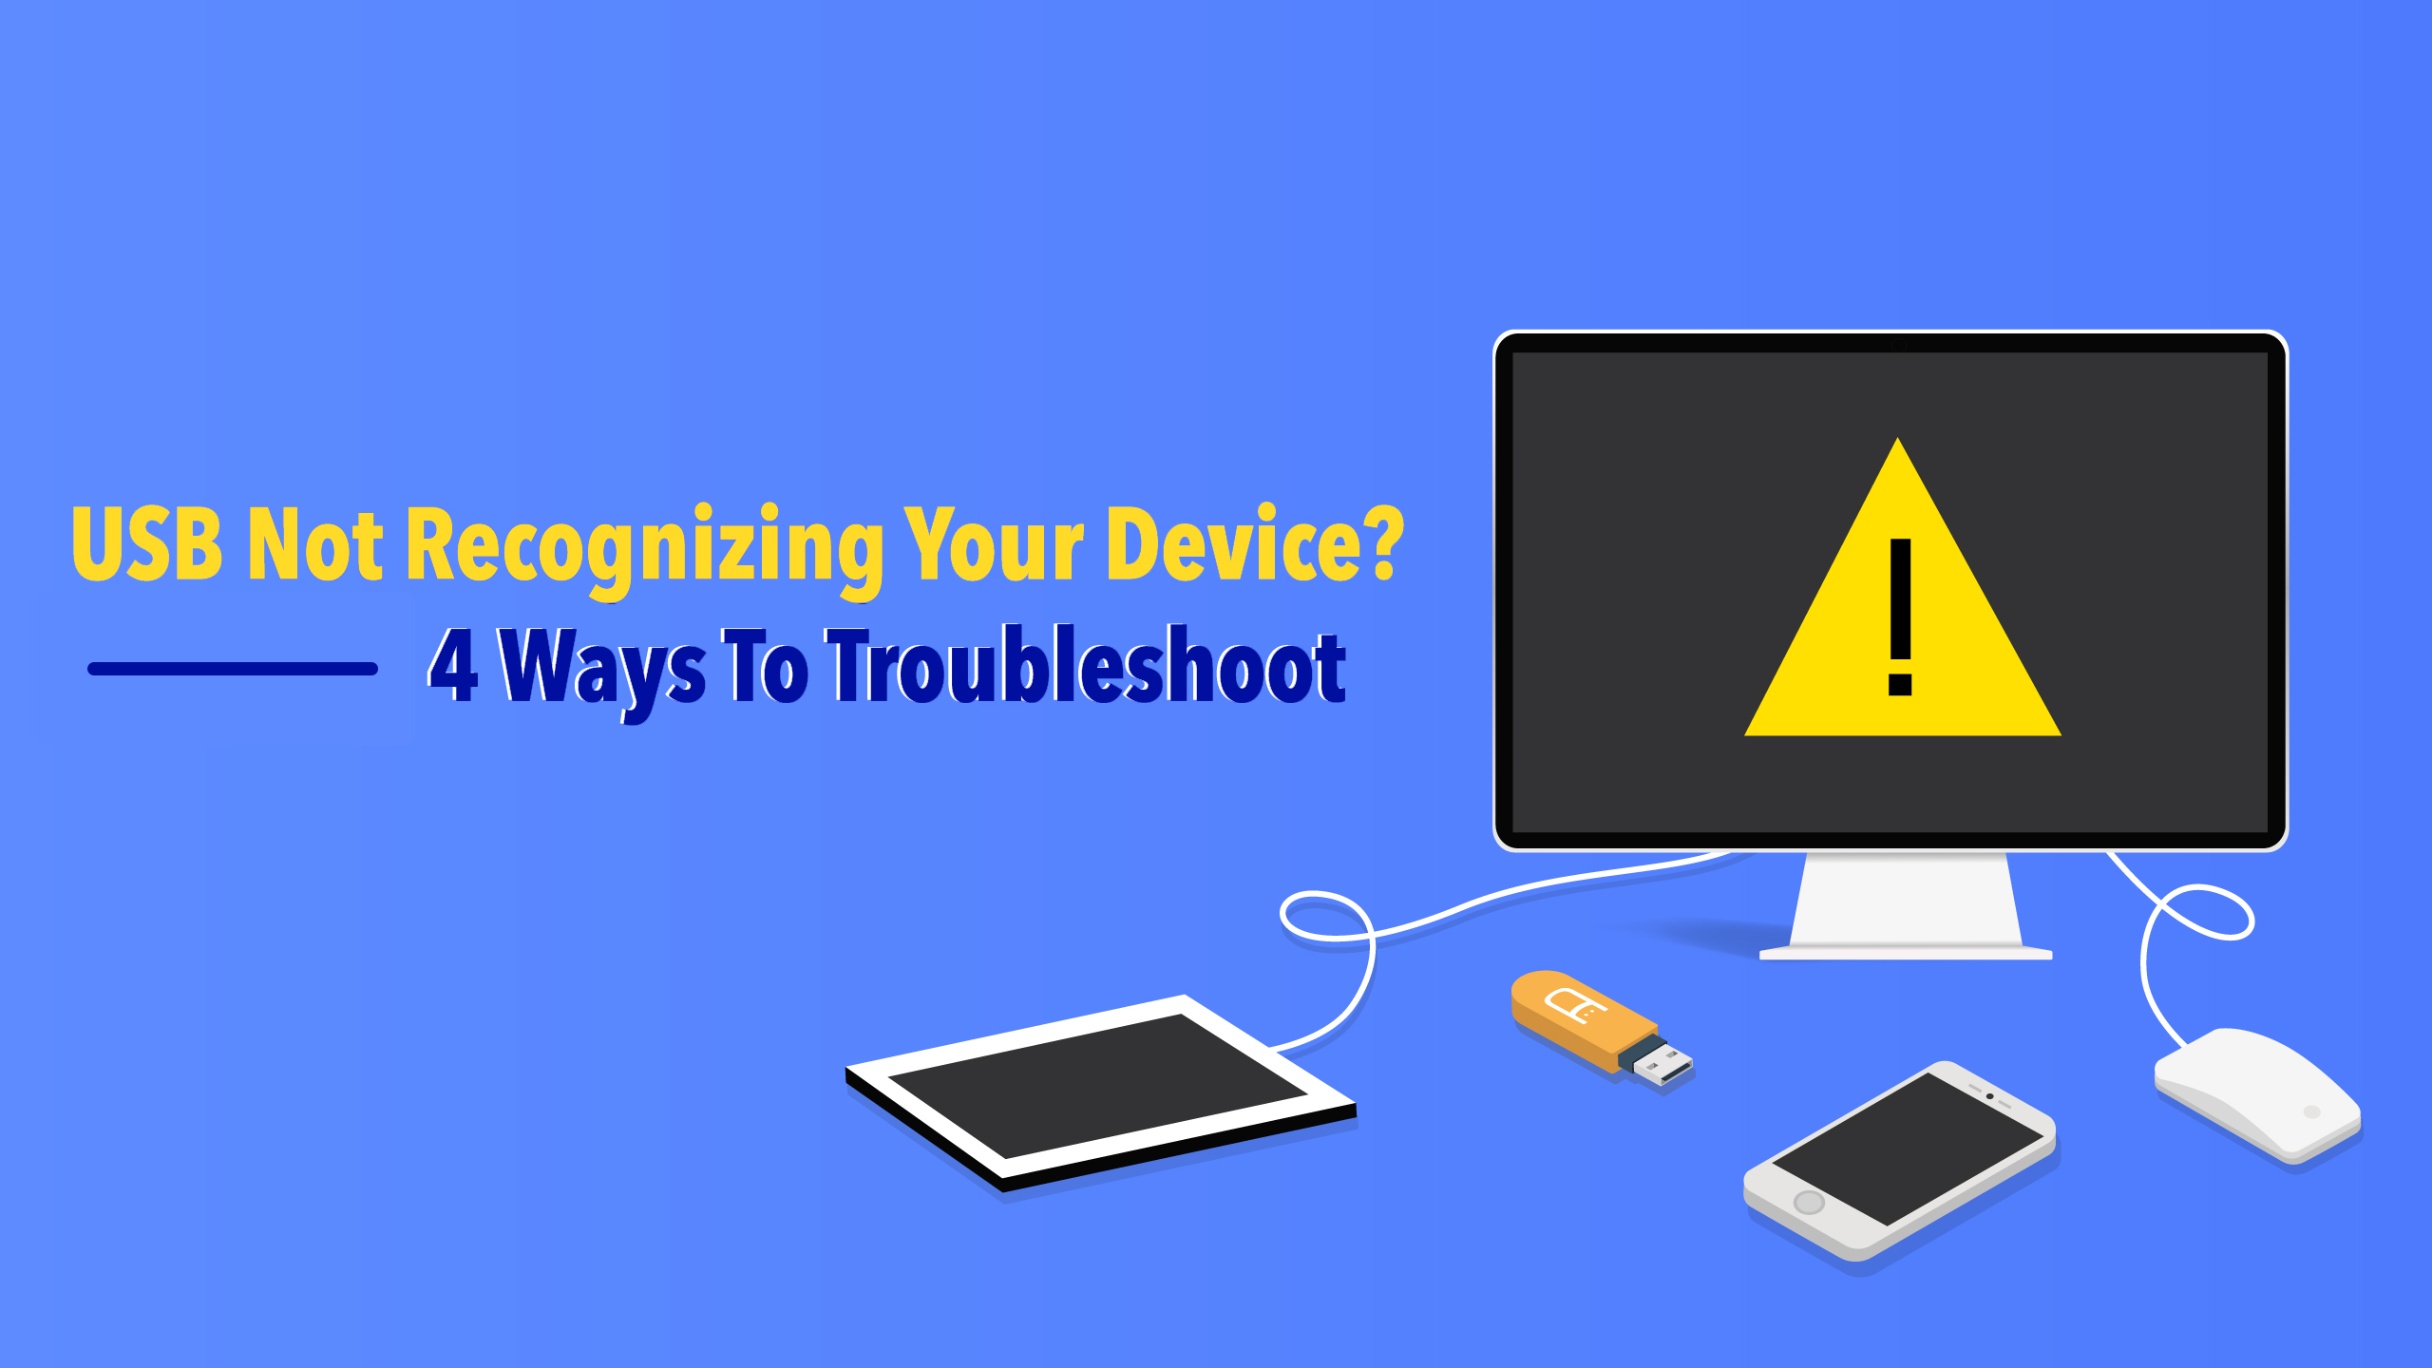 Troubleshooting USB not recognizing your device - USB Memory Direct